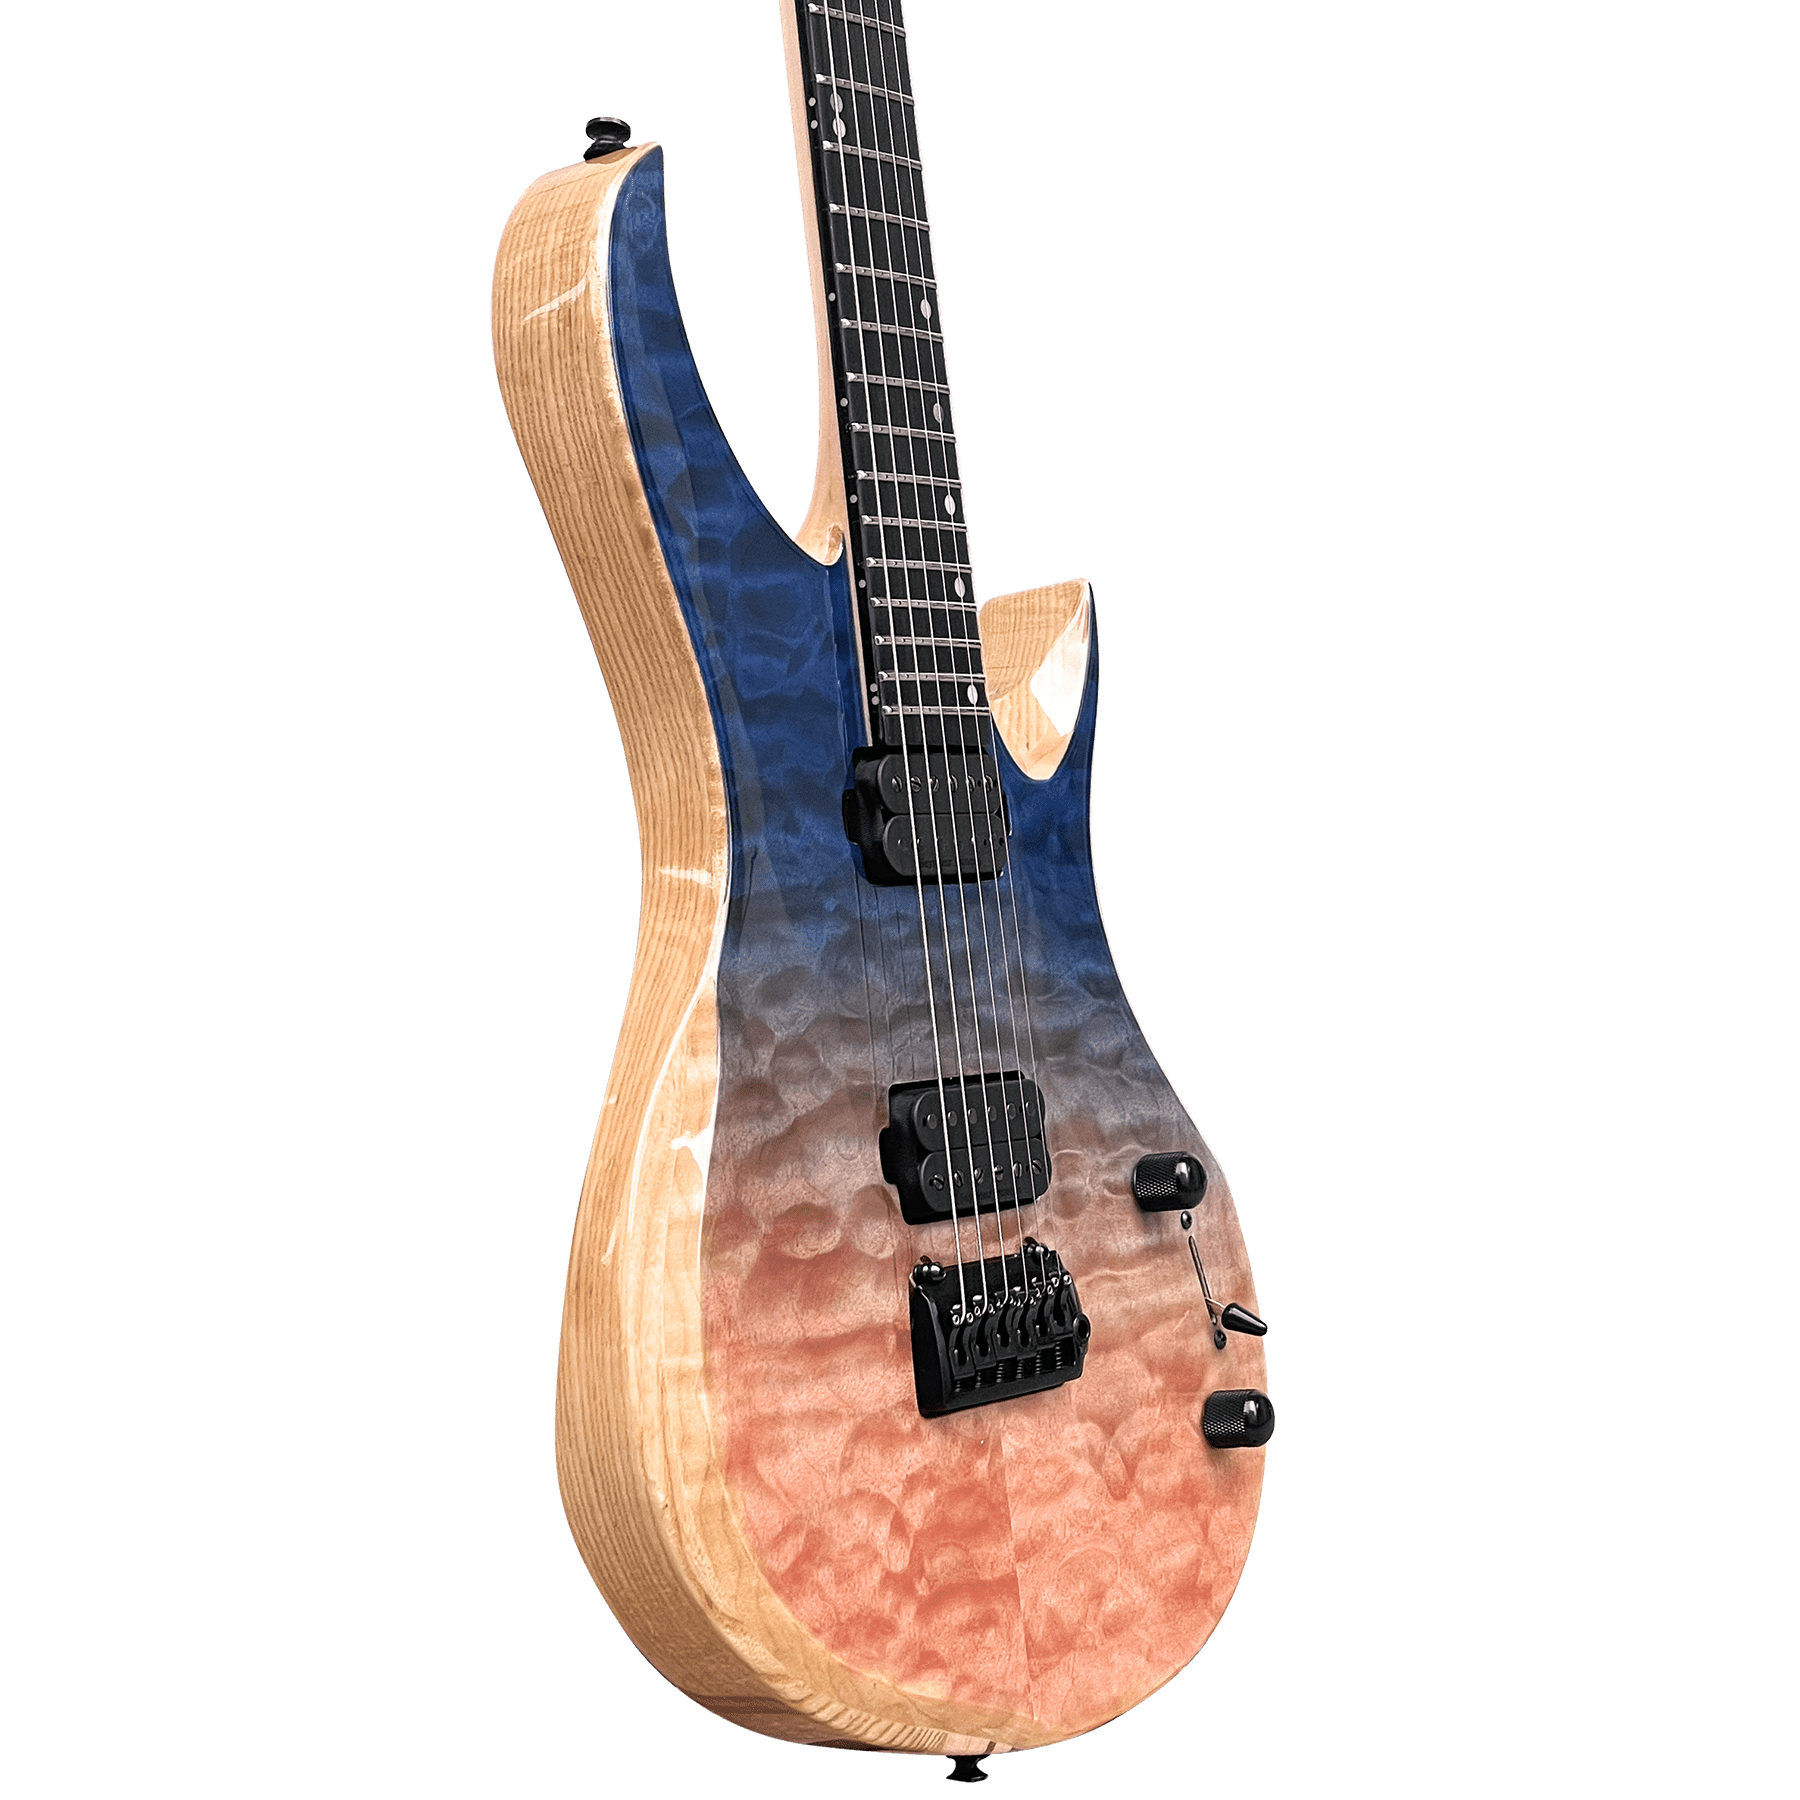 Spring BH 6 Quilted Maple Blue Pink - 10S Guitars